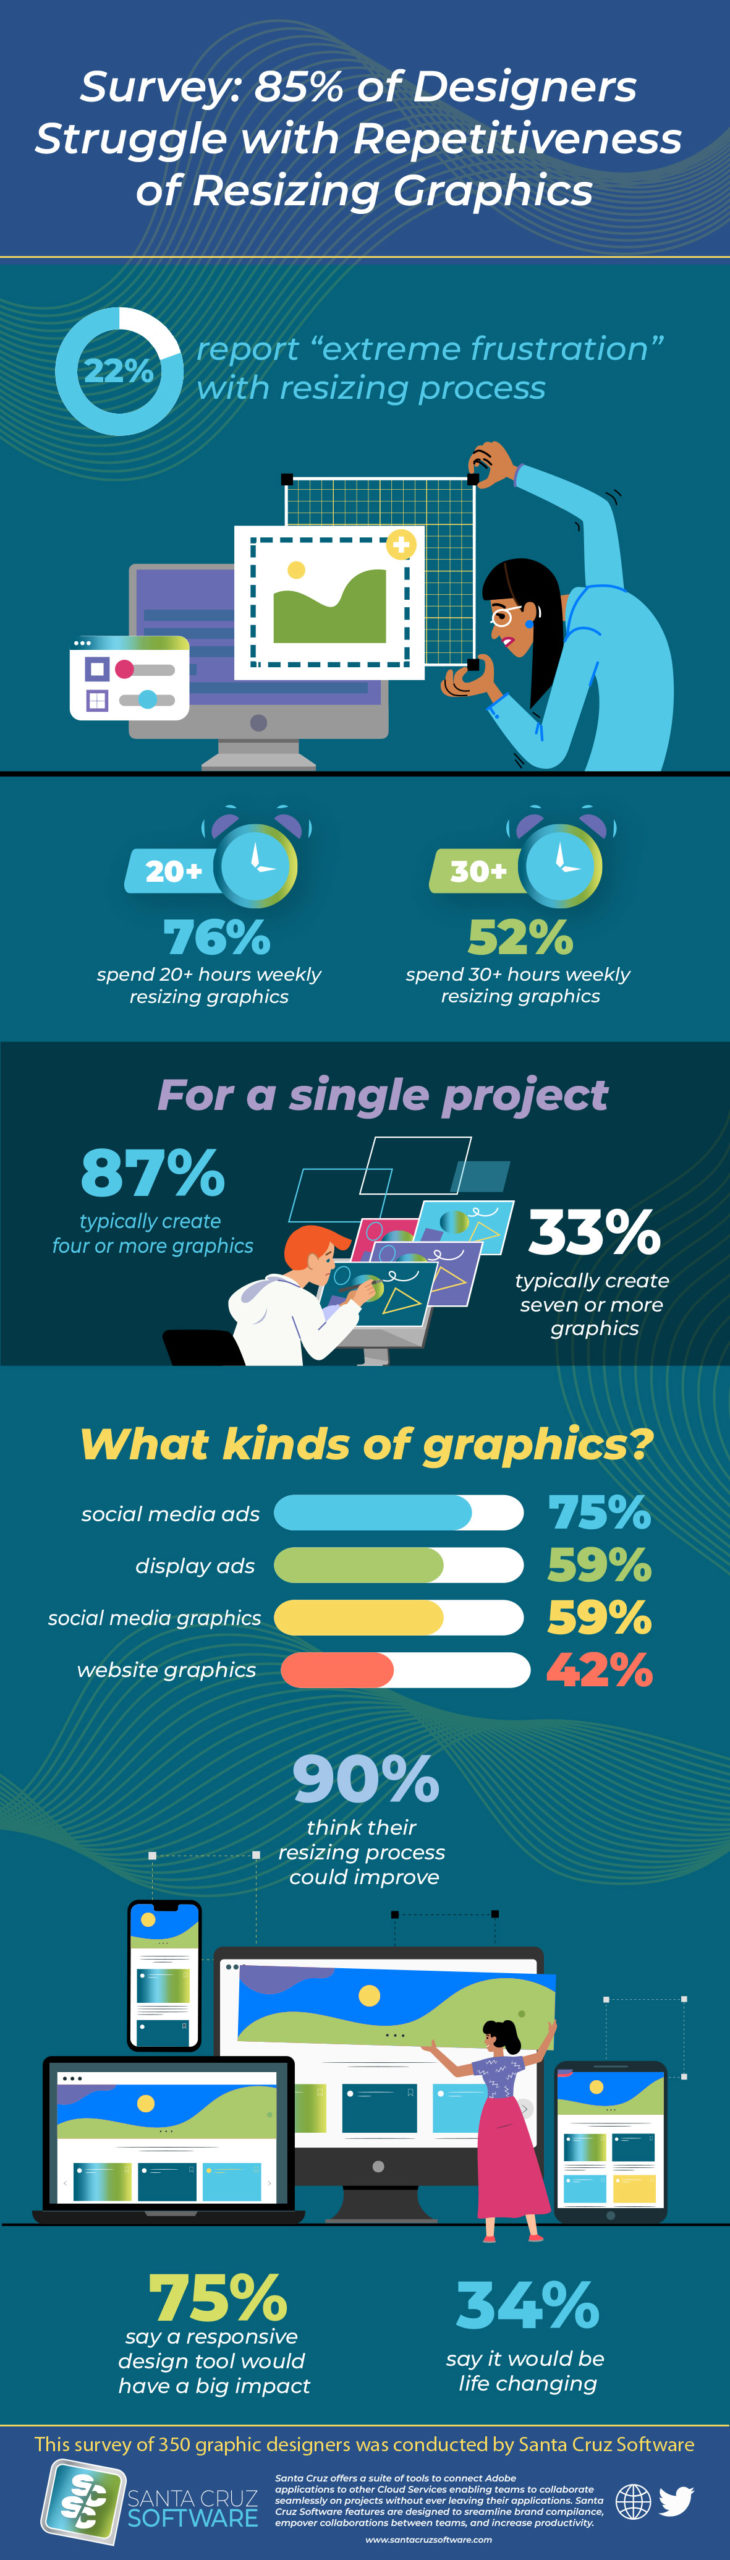 Infographic on Survey about Resizing Graphics